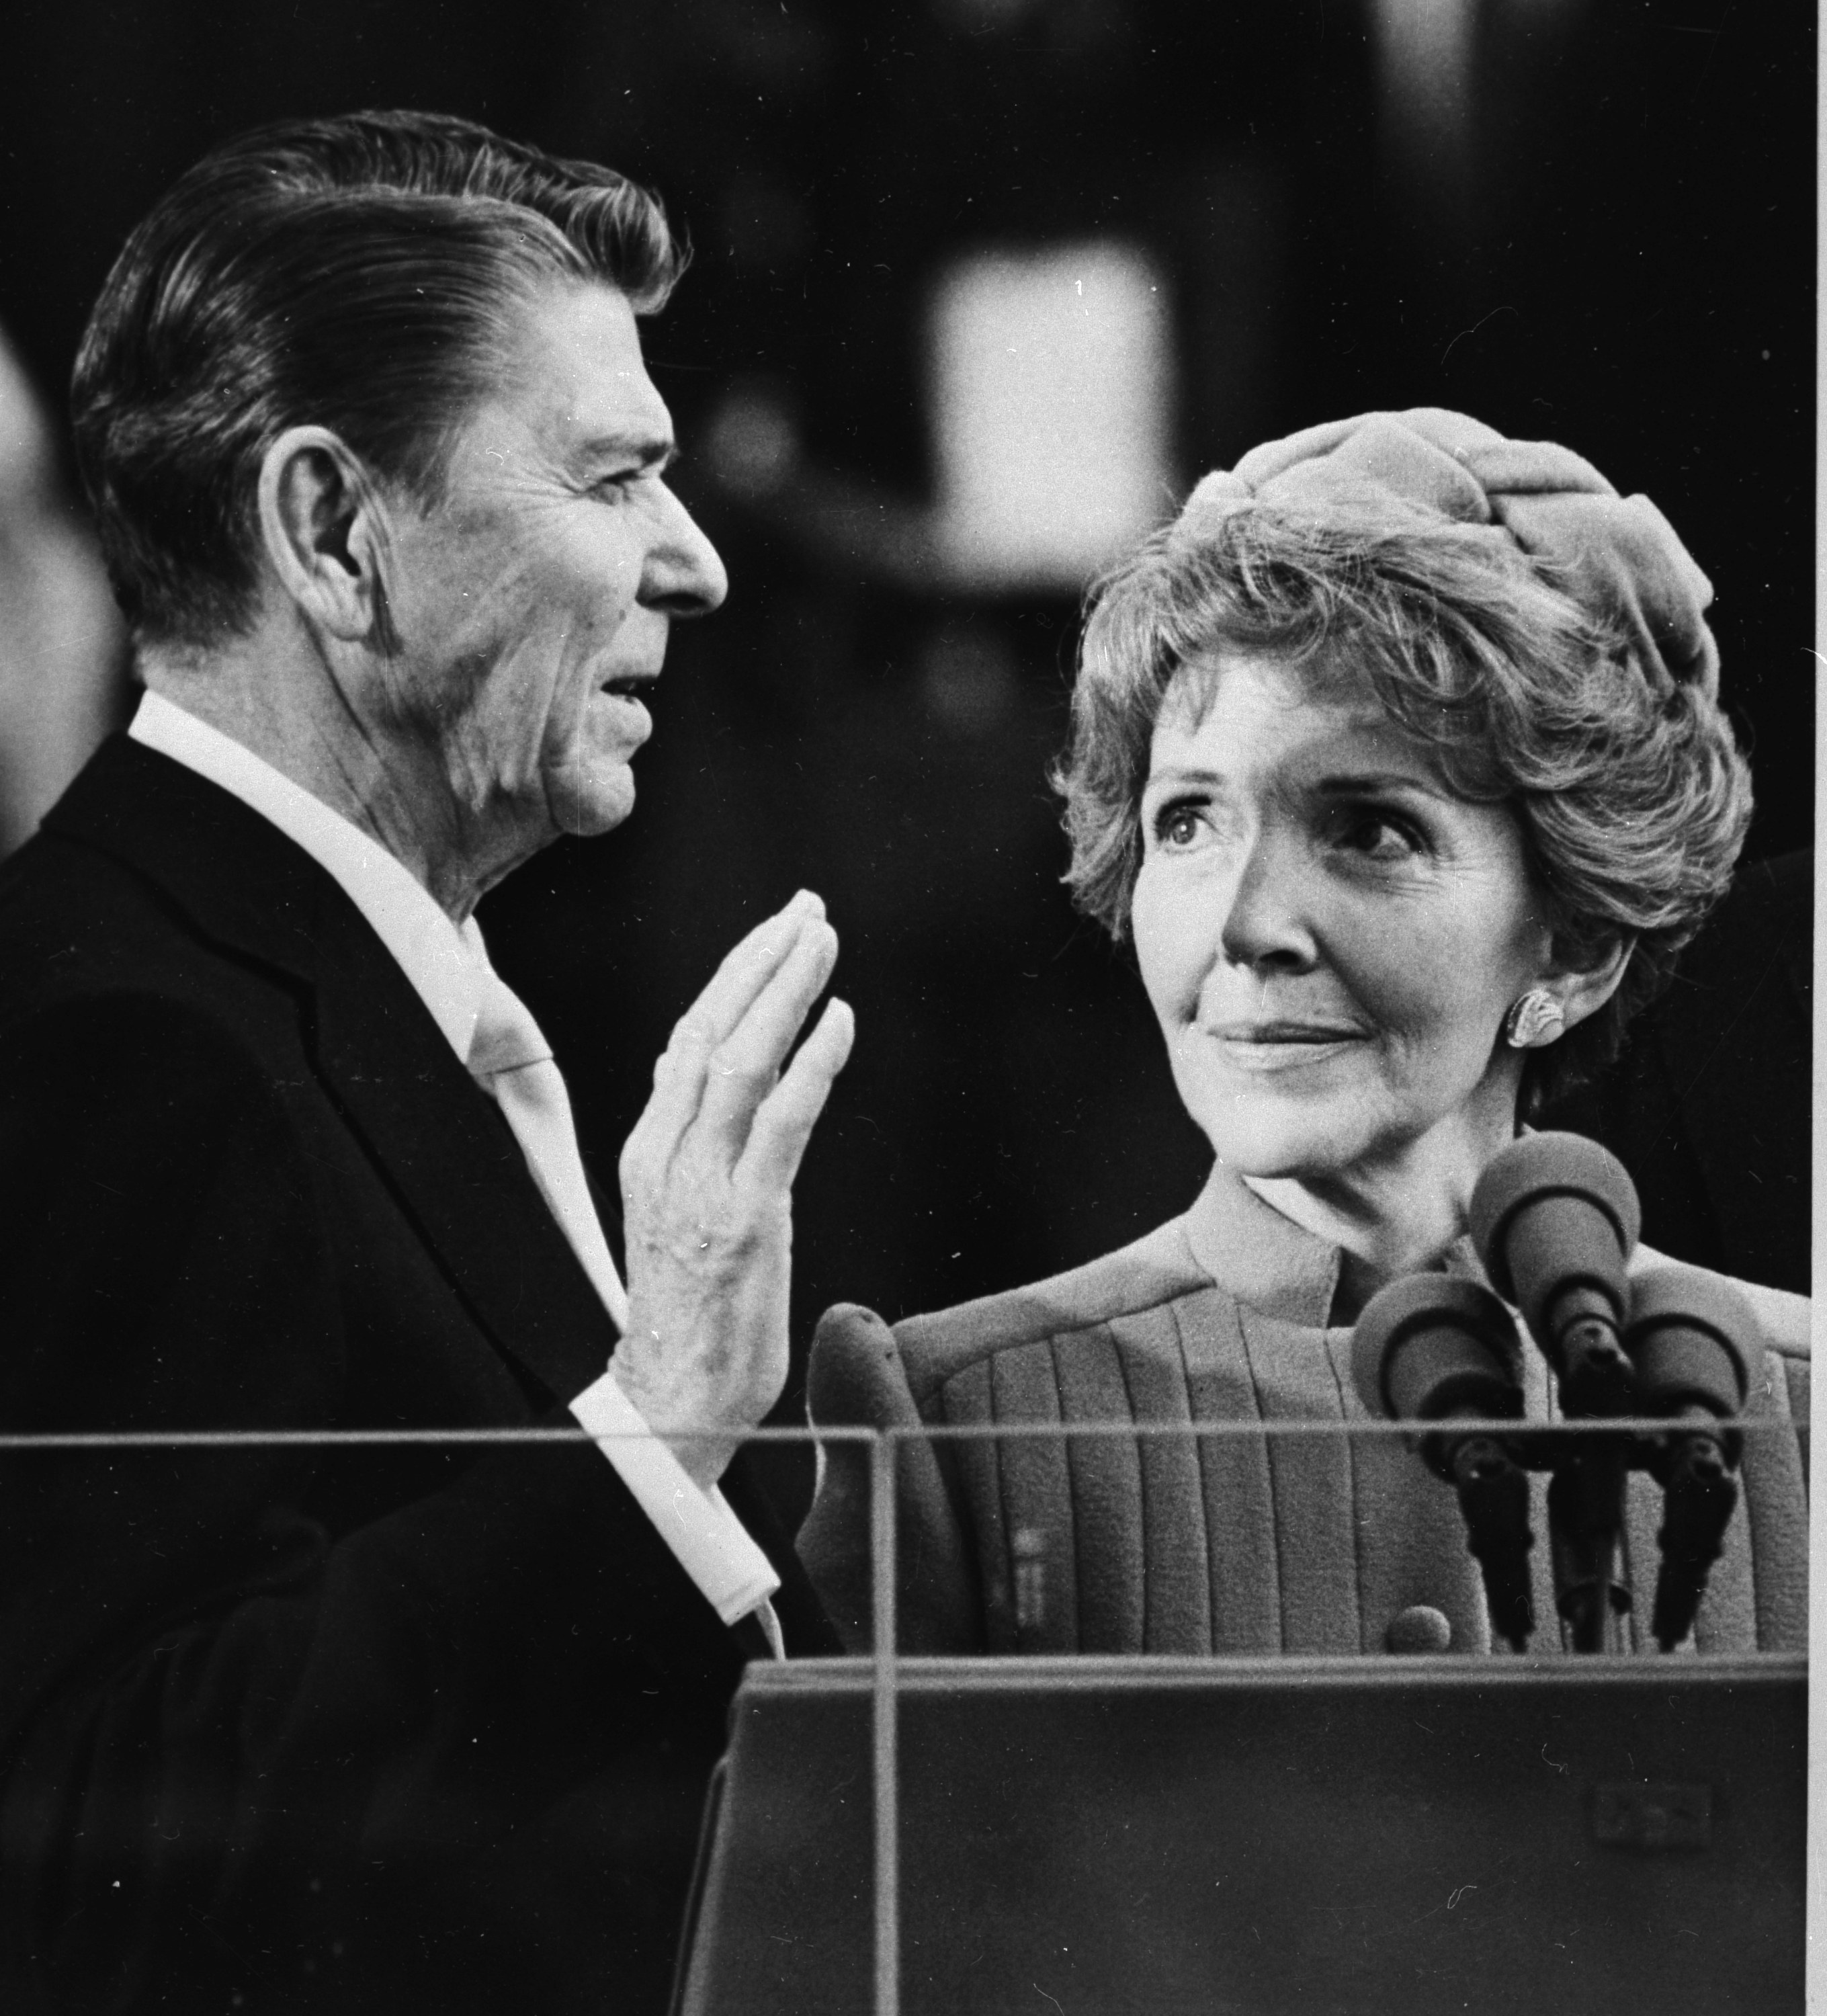 Photos: The life of former first lady Nancy Reagan (1921-2016)